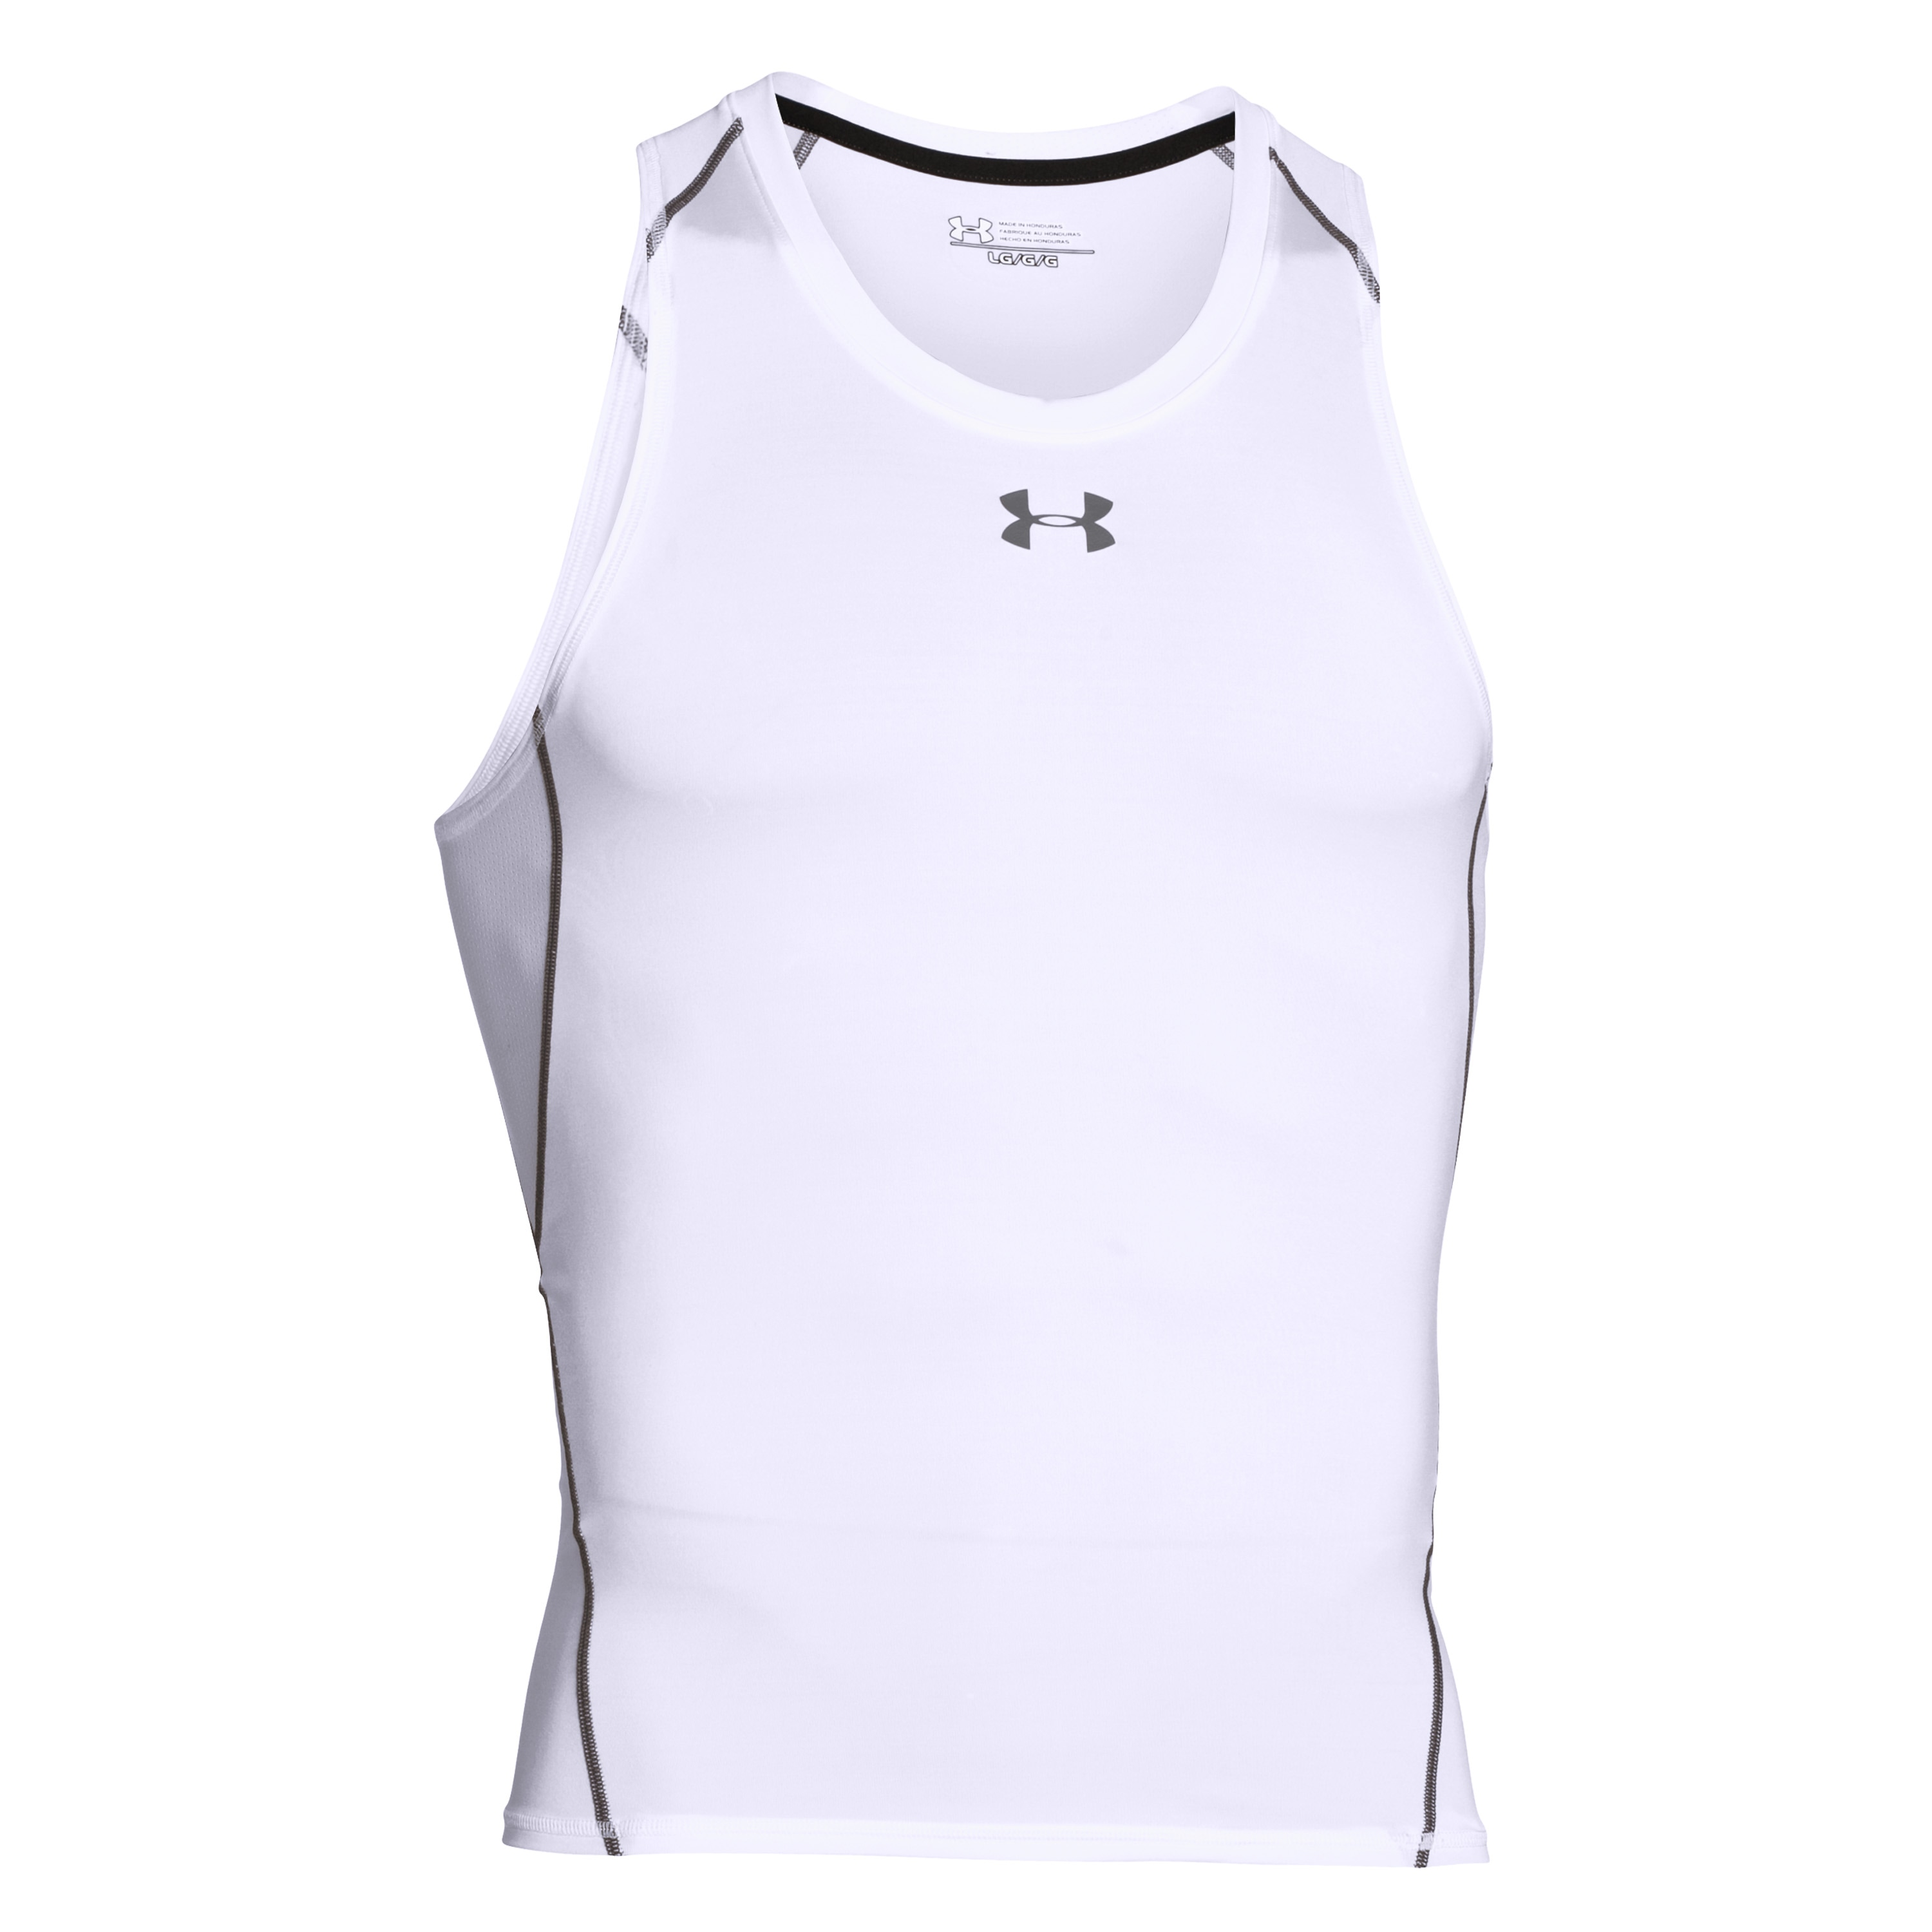 under armour tight fit shirt